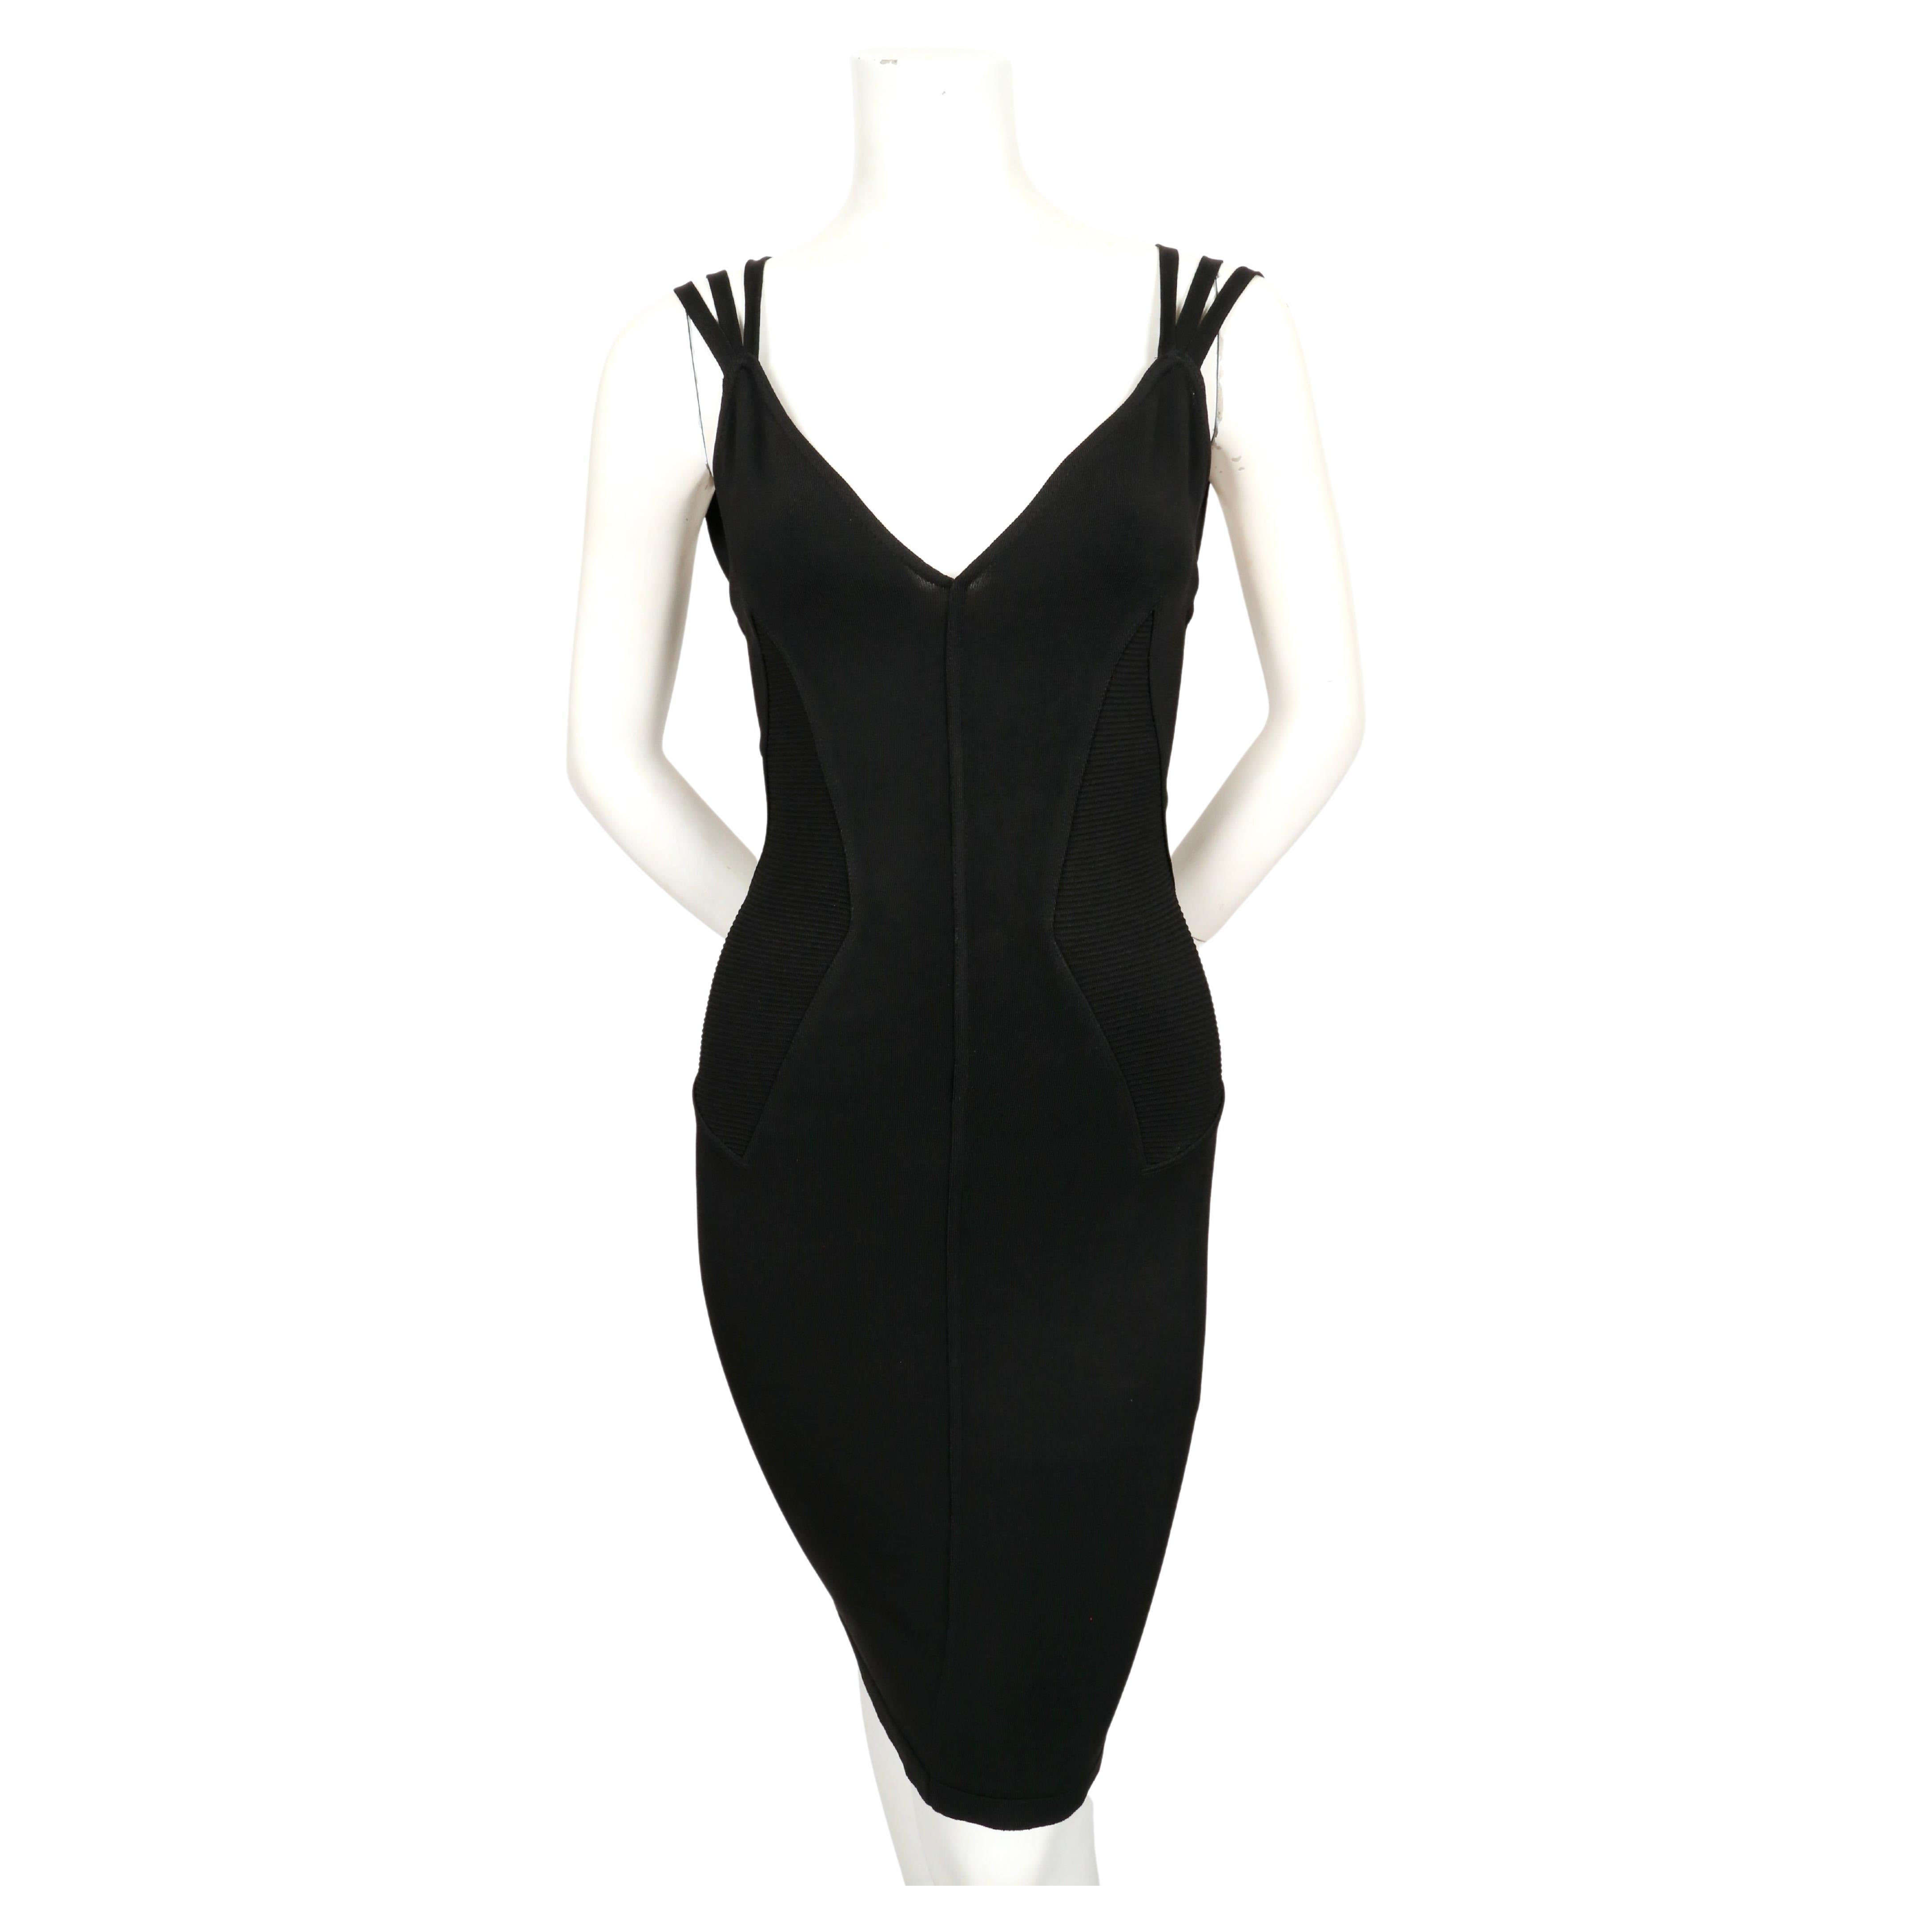 Jet-black knit dress with corseted waist and unique triple straps designed by Azzedine Alaia exactly as seen on the spring 1990 runway. Size XS.  Approximate measurements (unstretched): bust 30